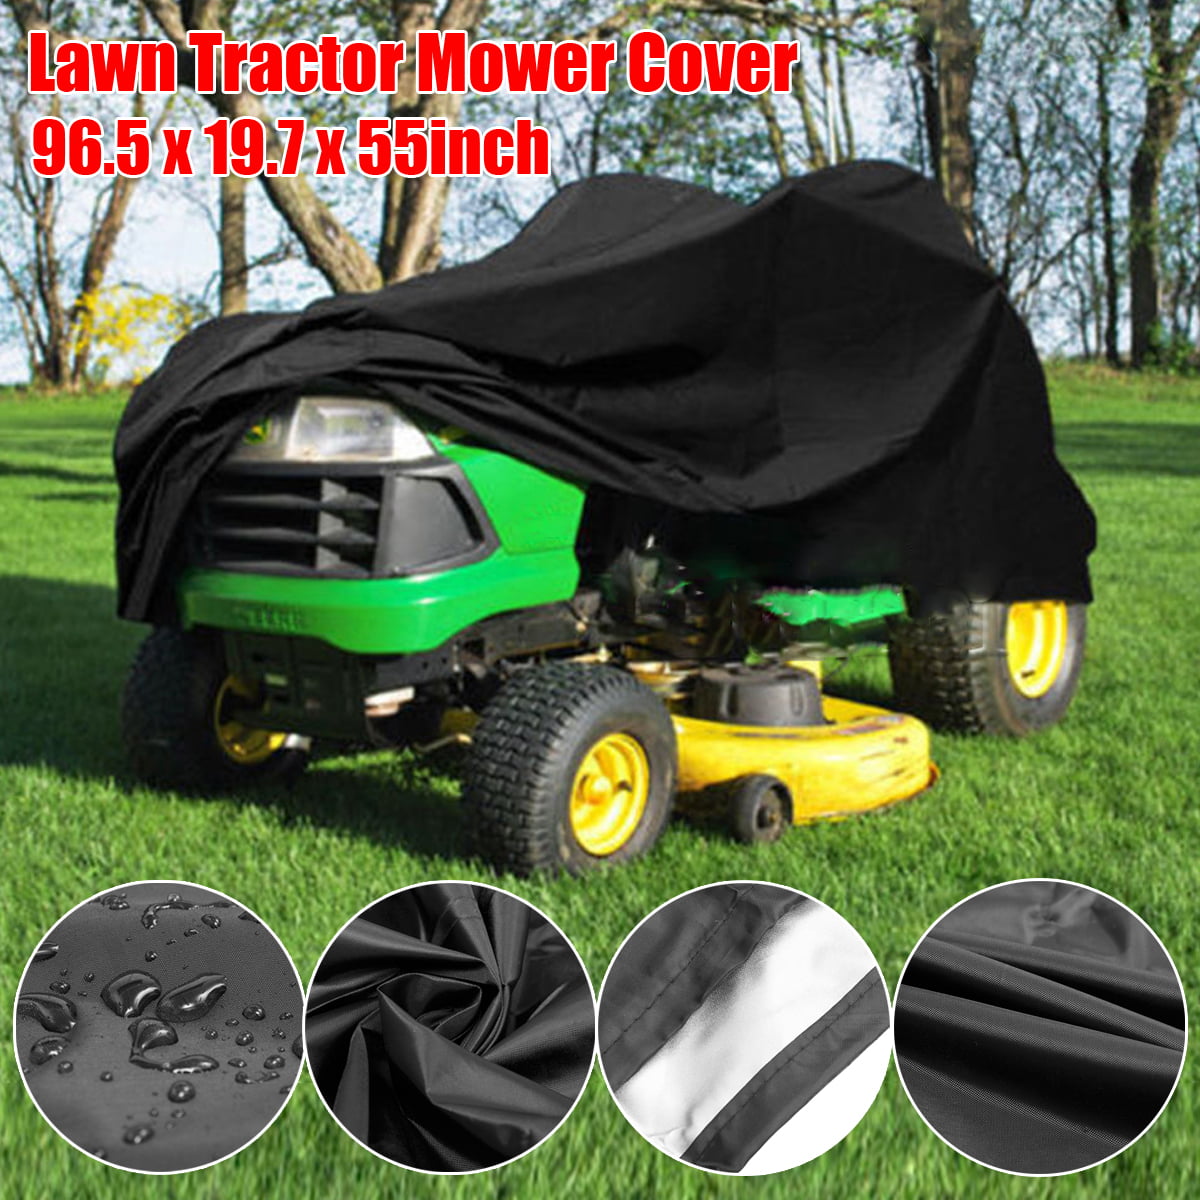 M,Black Lawn Mower Cover,Behind Lawn Mower Covers Waterproof Dustproof All-Weather Outdoor/Indoor Anti-UV Protector 210D Oxford Cloth Coated Protective Cover Tarp Universal Lawn Tractor Riding Mower